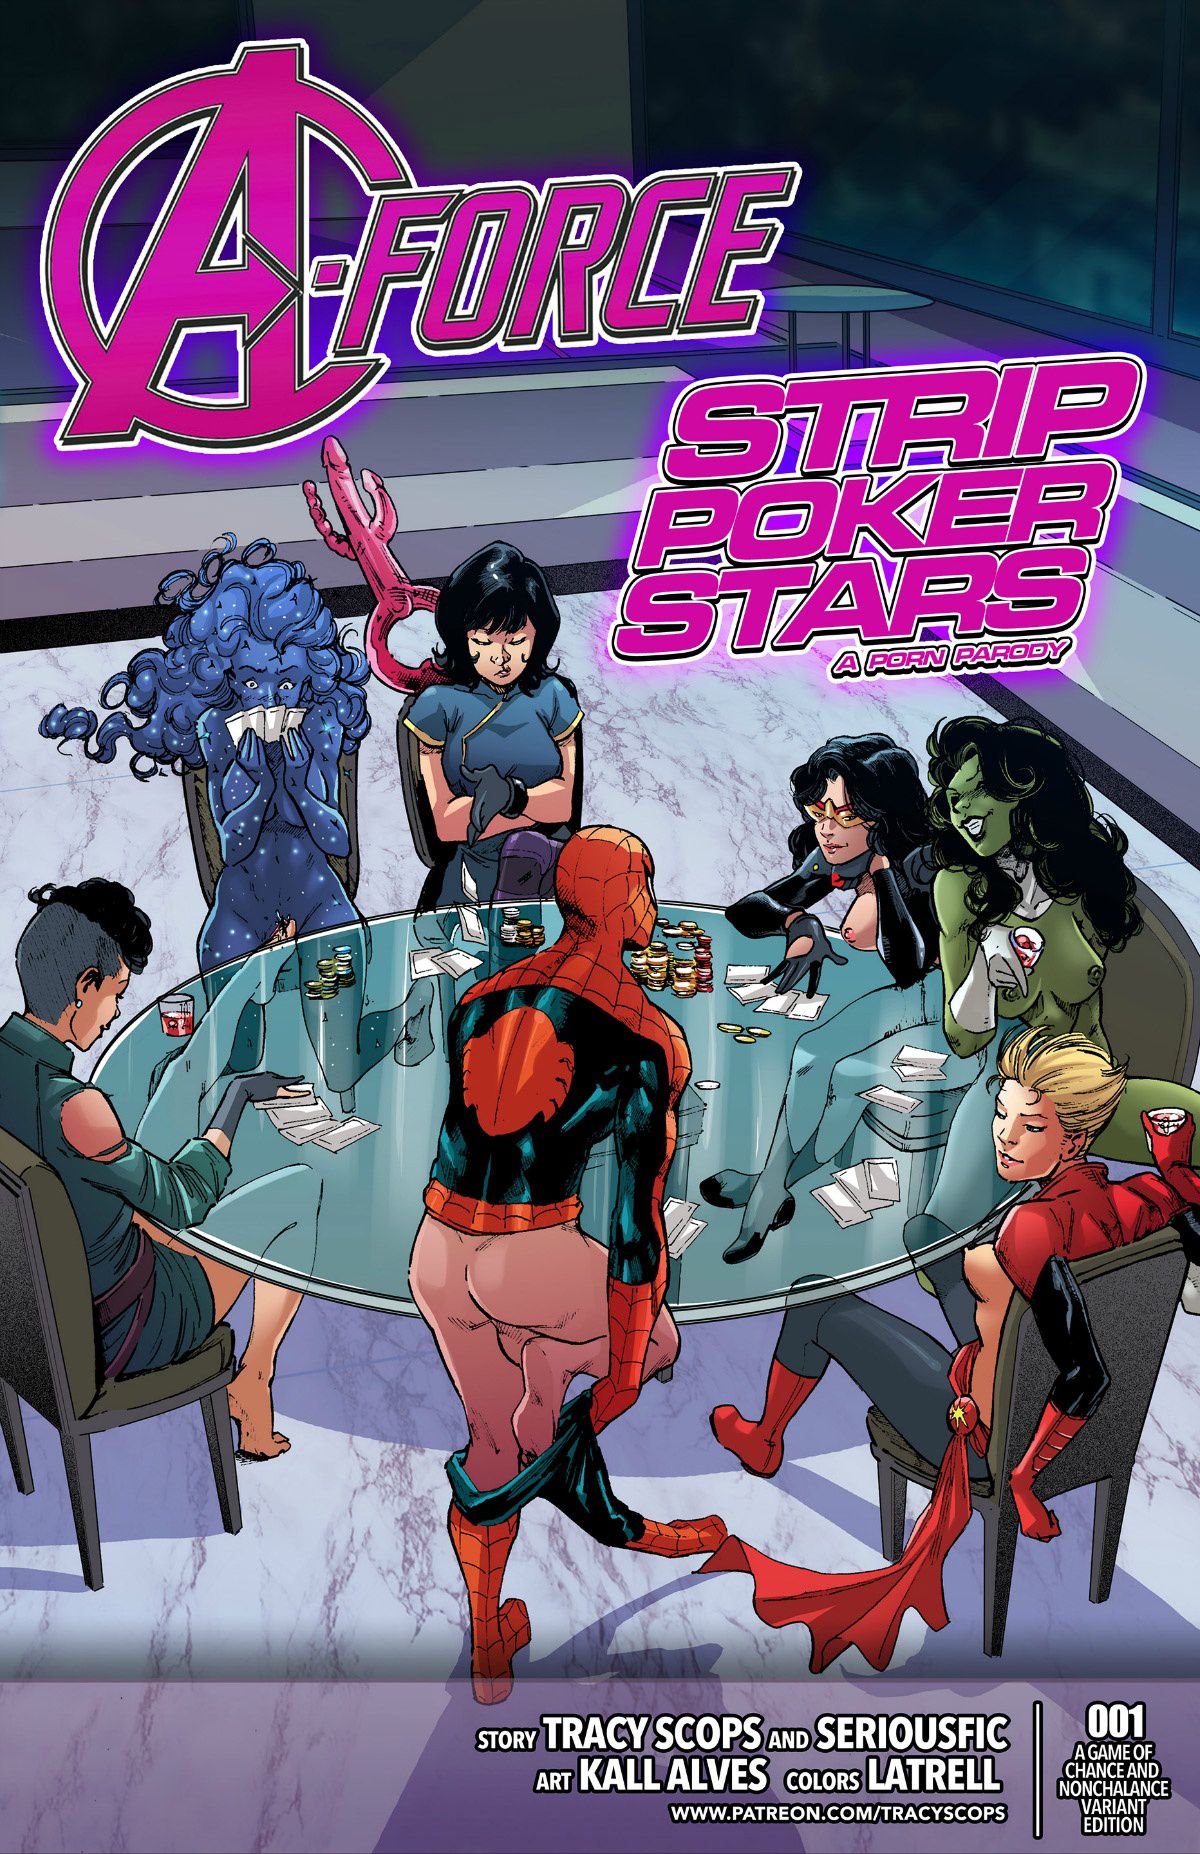 Porn Cartoons Comic Strips About Stars - A-Force Strip Poker Stars (Spider-Man , The Avengers) [Tracy Scops] Porn  Comic - AllPornComic